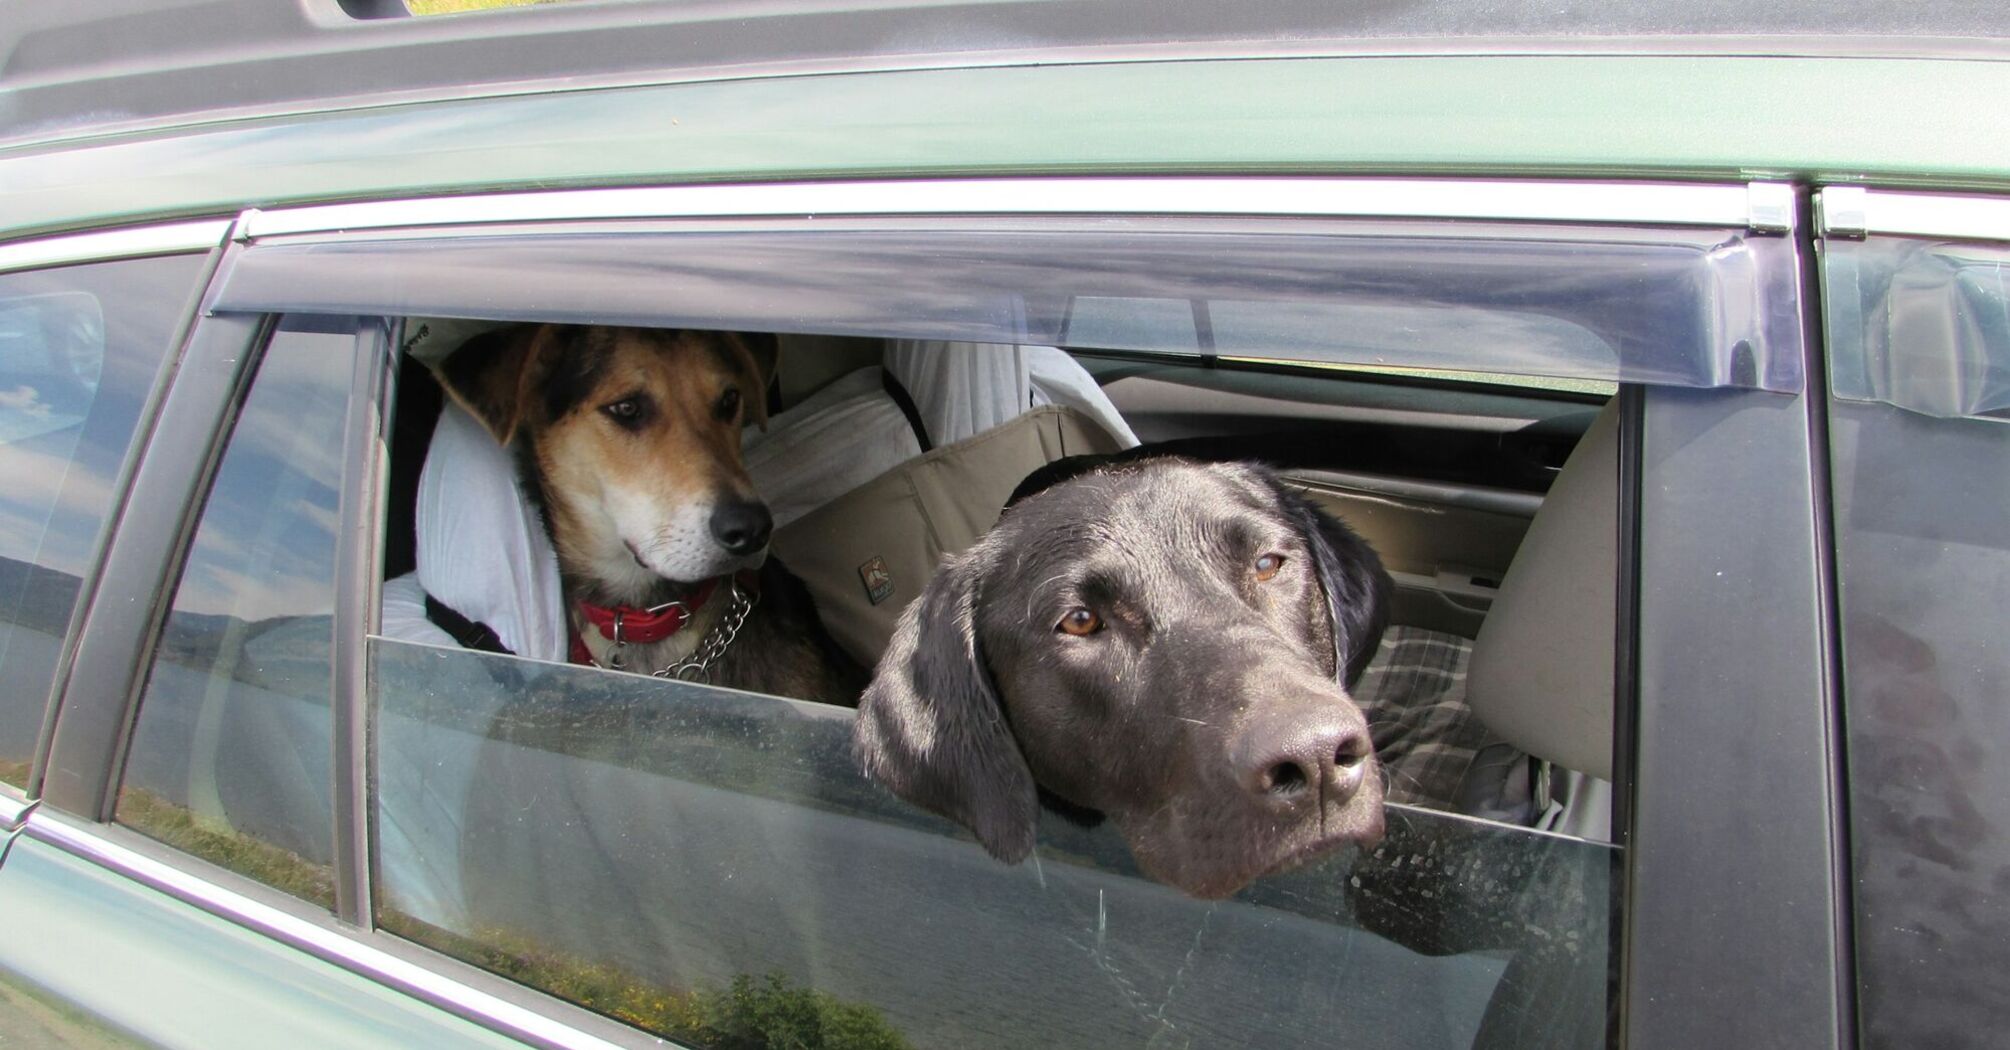 Two dogs looking out of a car window during a road trip